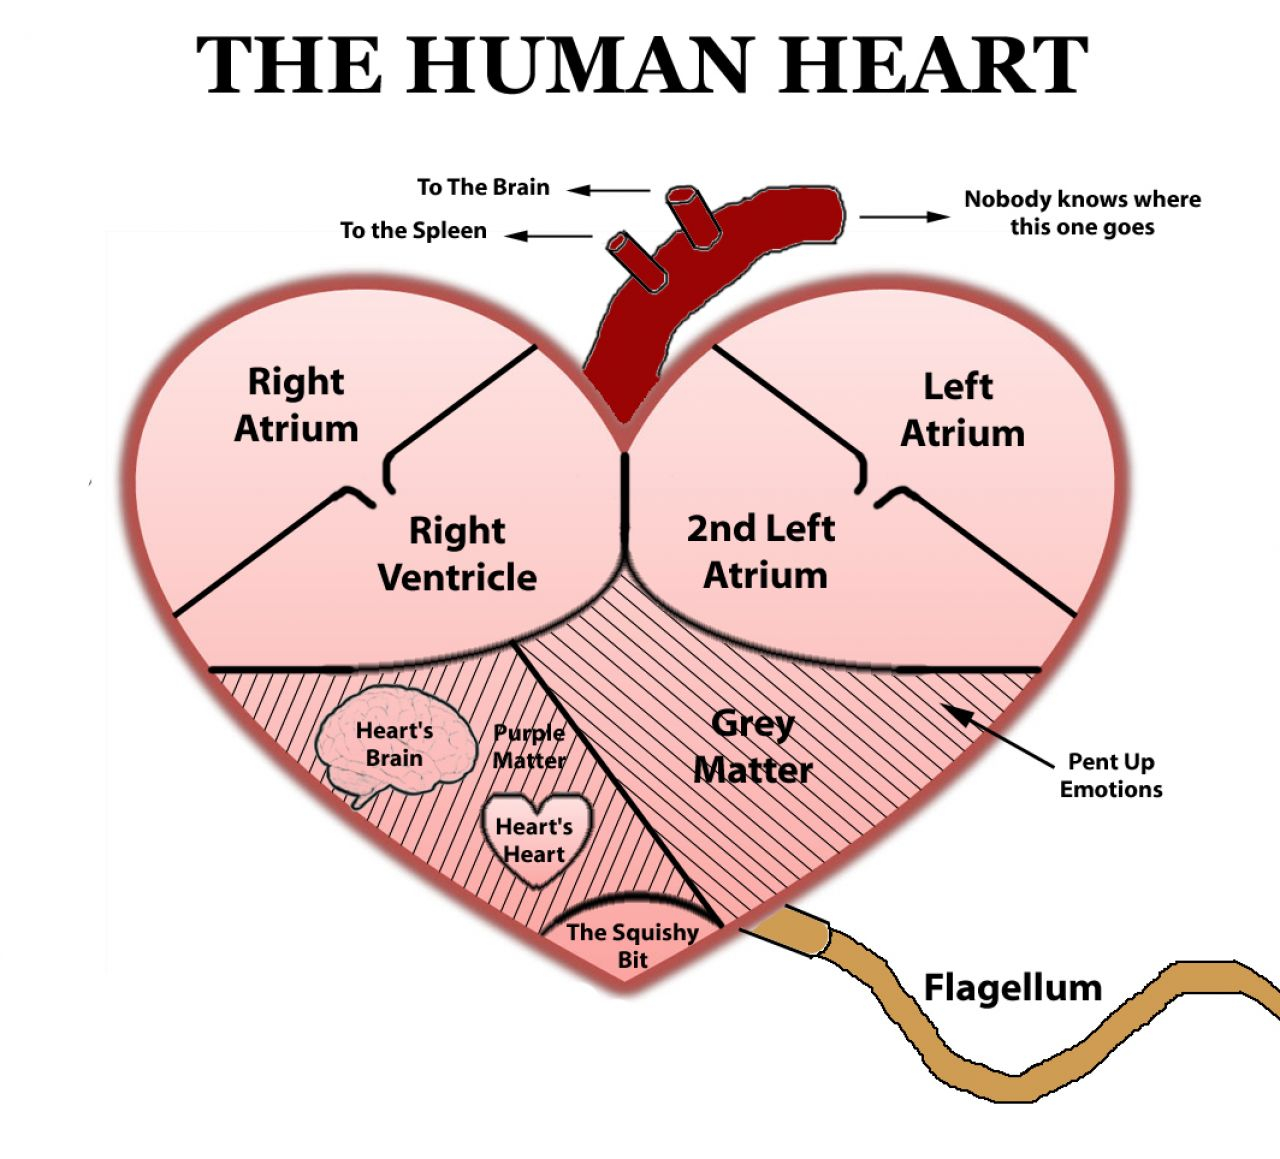 Labeled Heart Diagram Free Human Heart Sketch Diagram Download Free Clip Art Free Clip